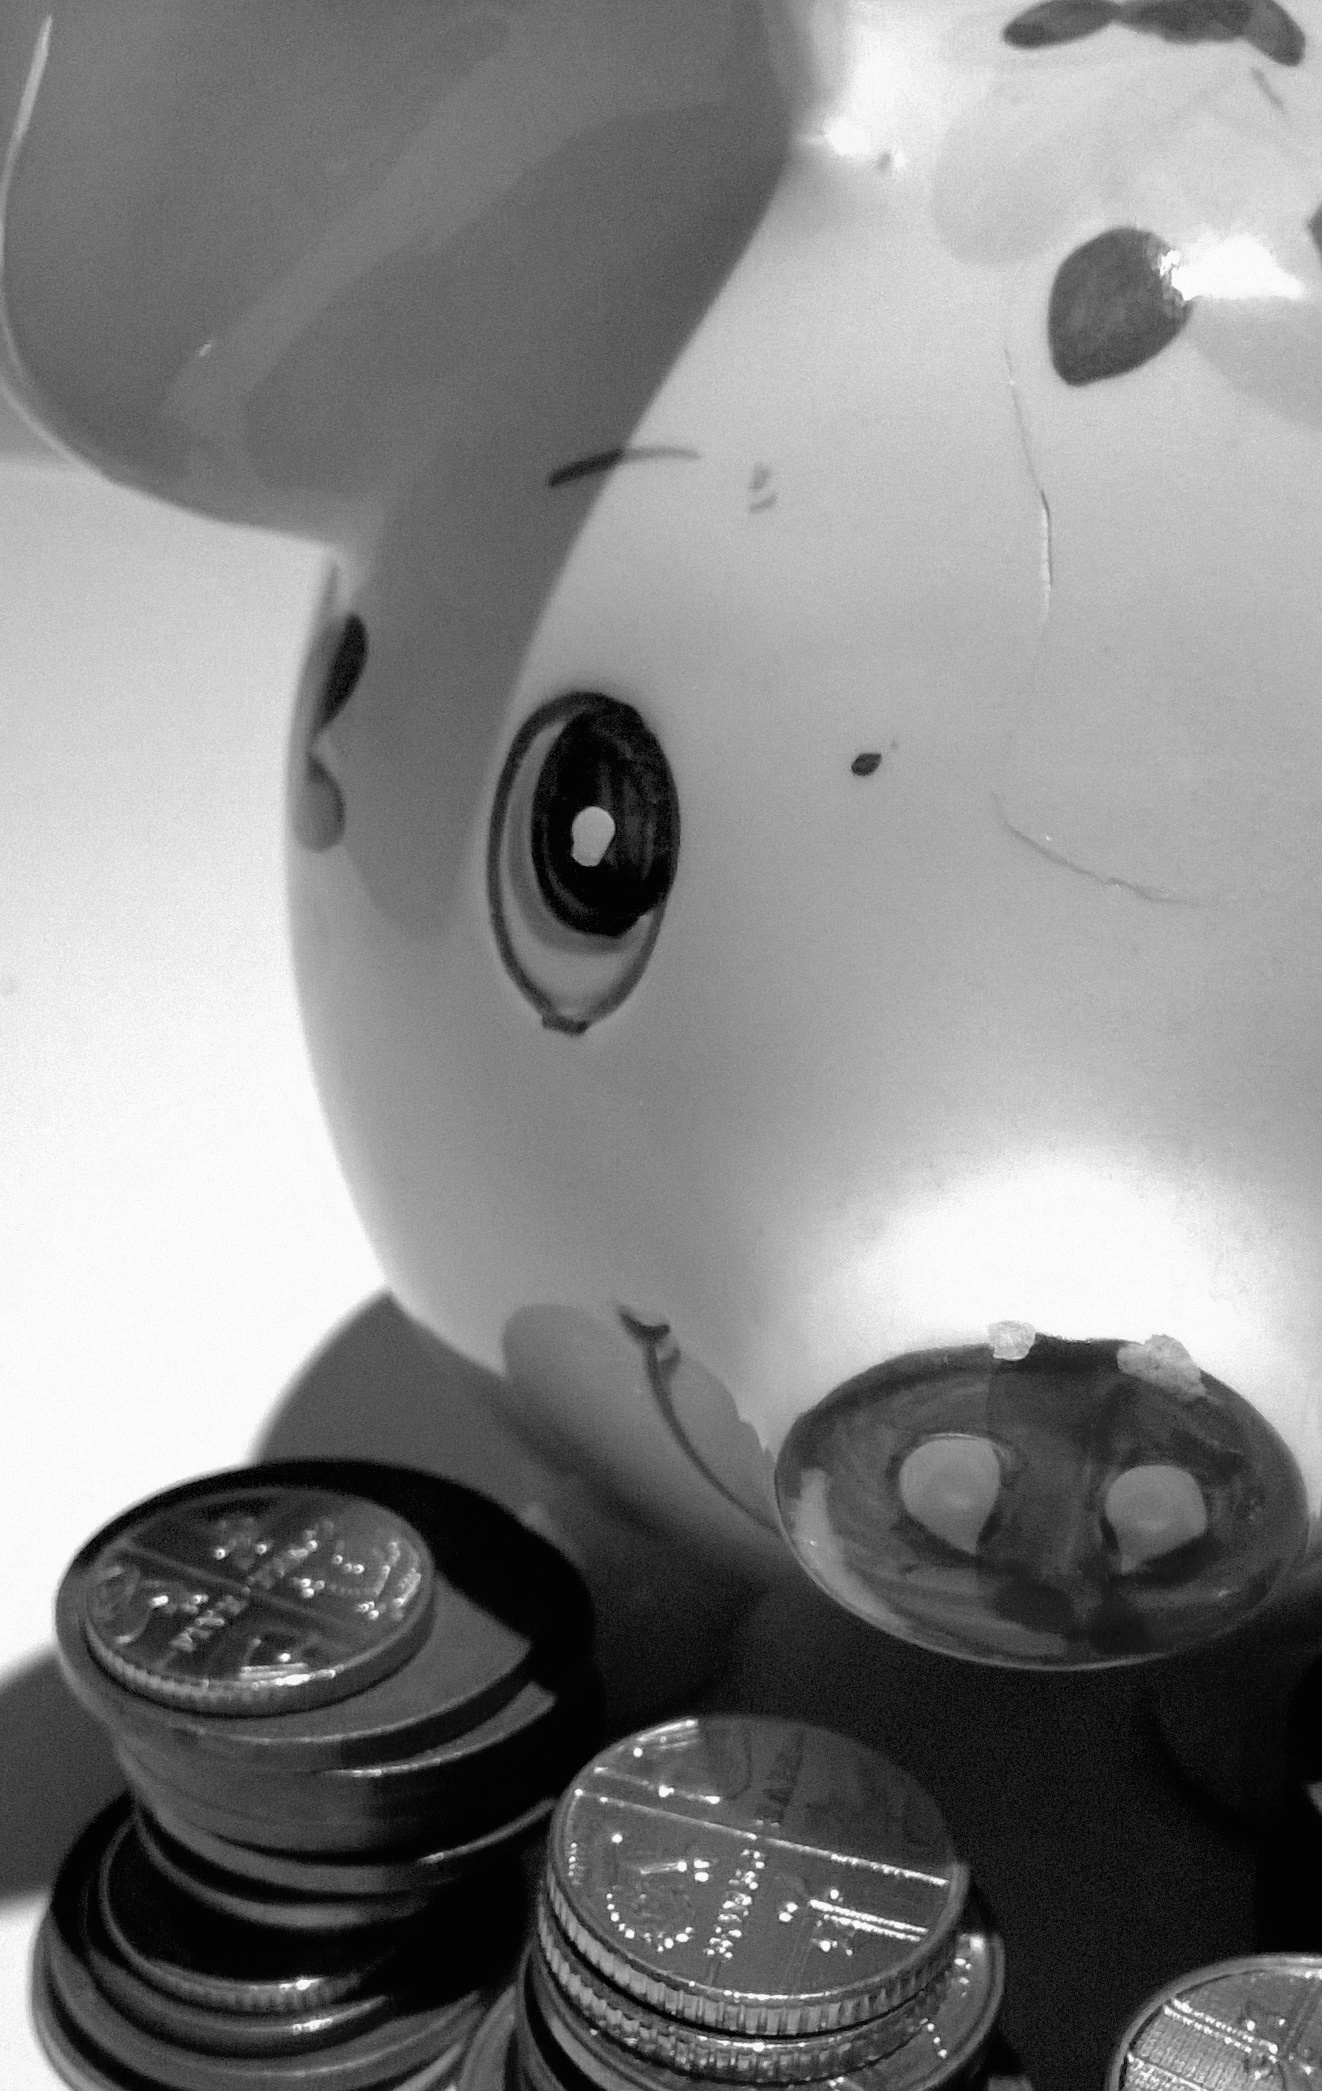 Is your piggy bank in good use?